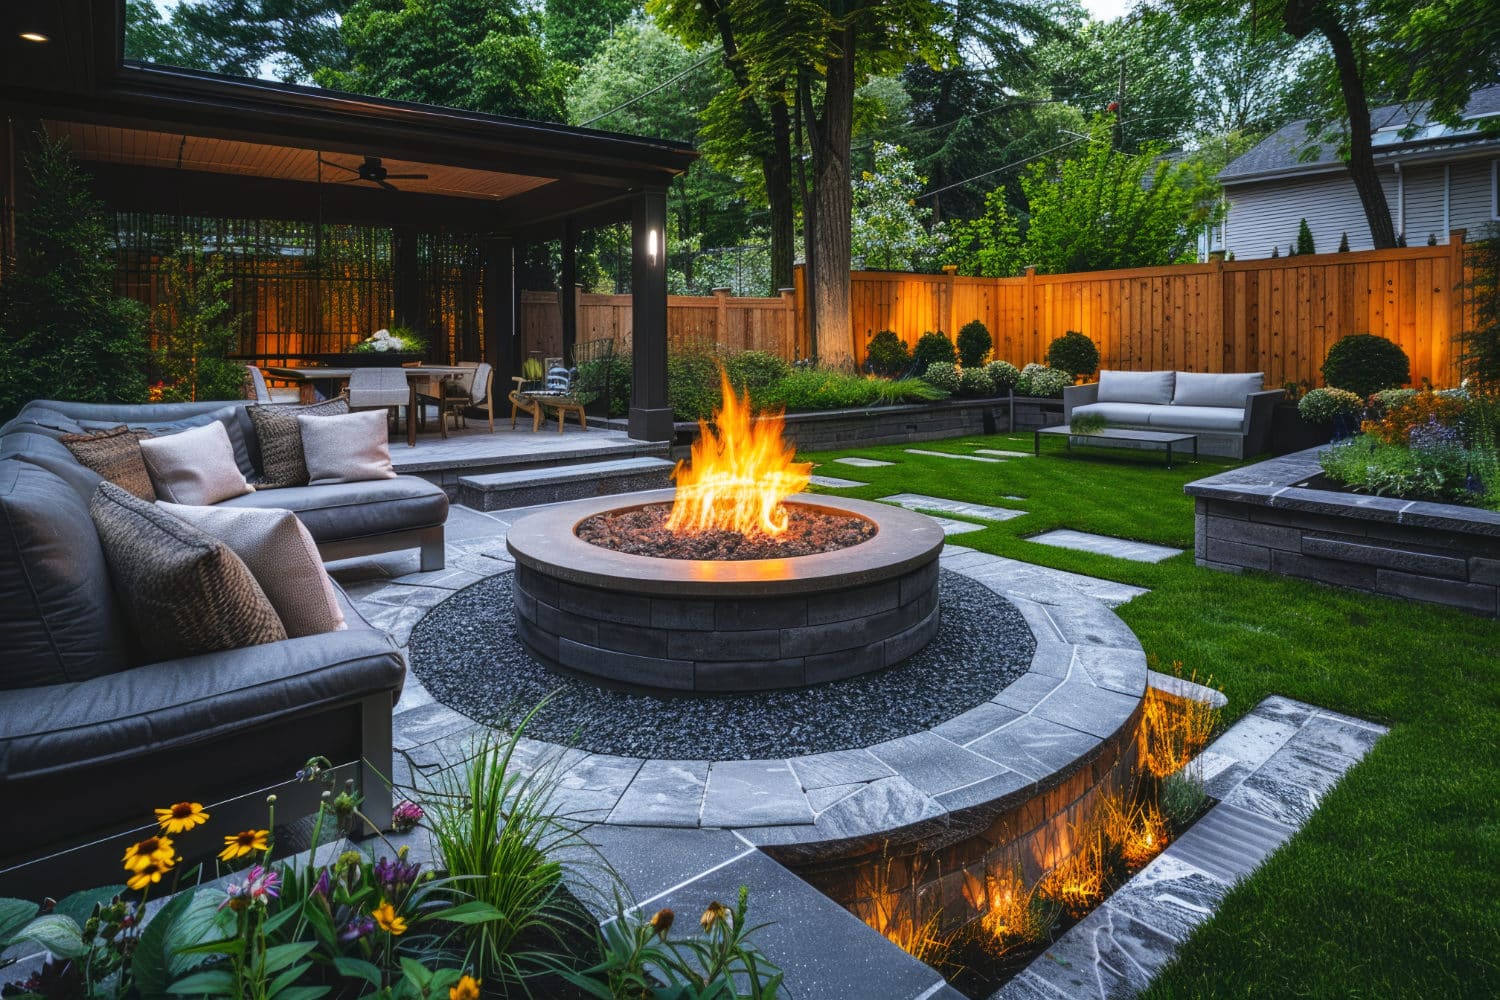 Modern backyard with outdoor seating, fire pit, and landscaping at dusk.